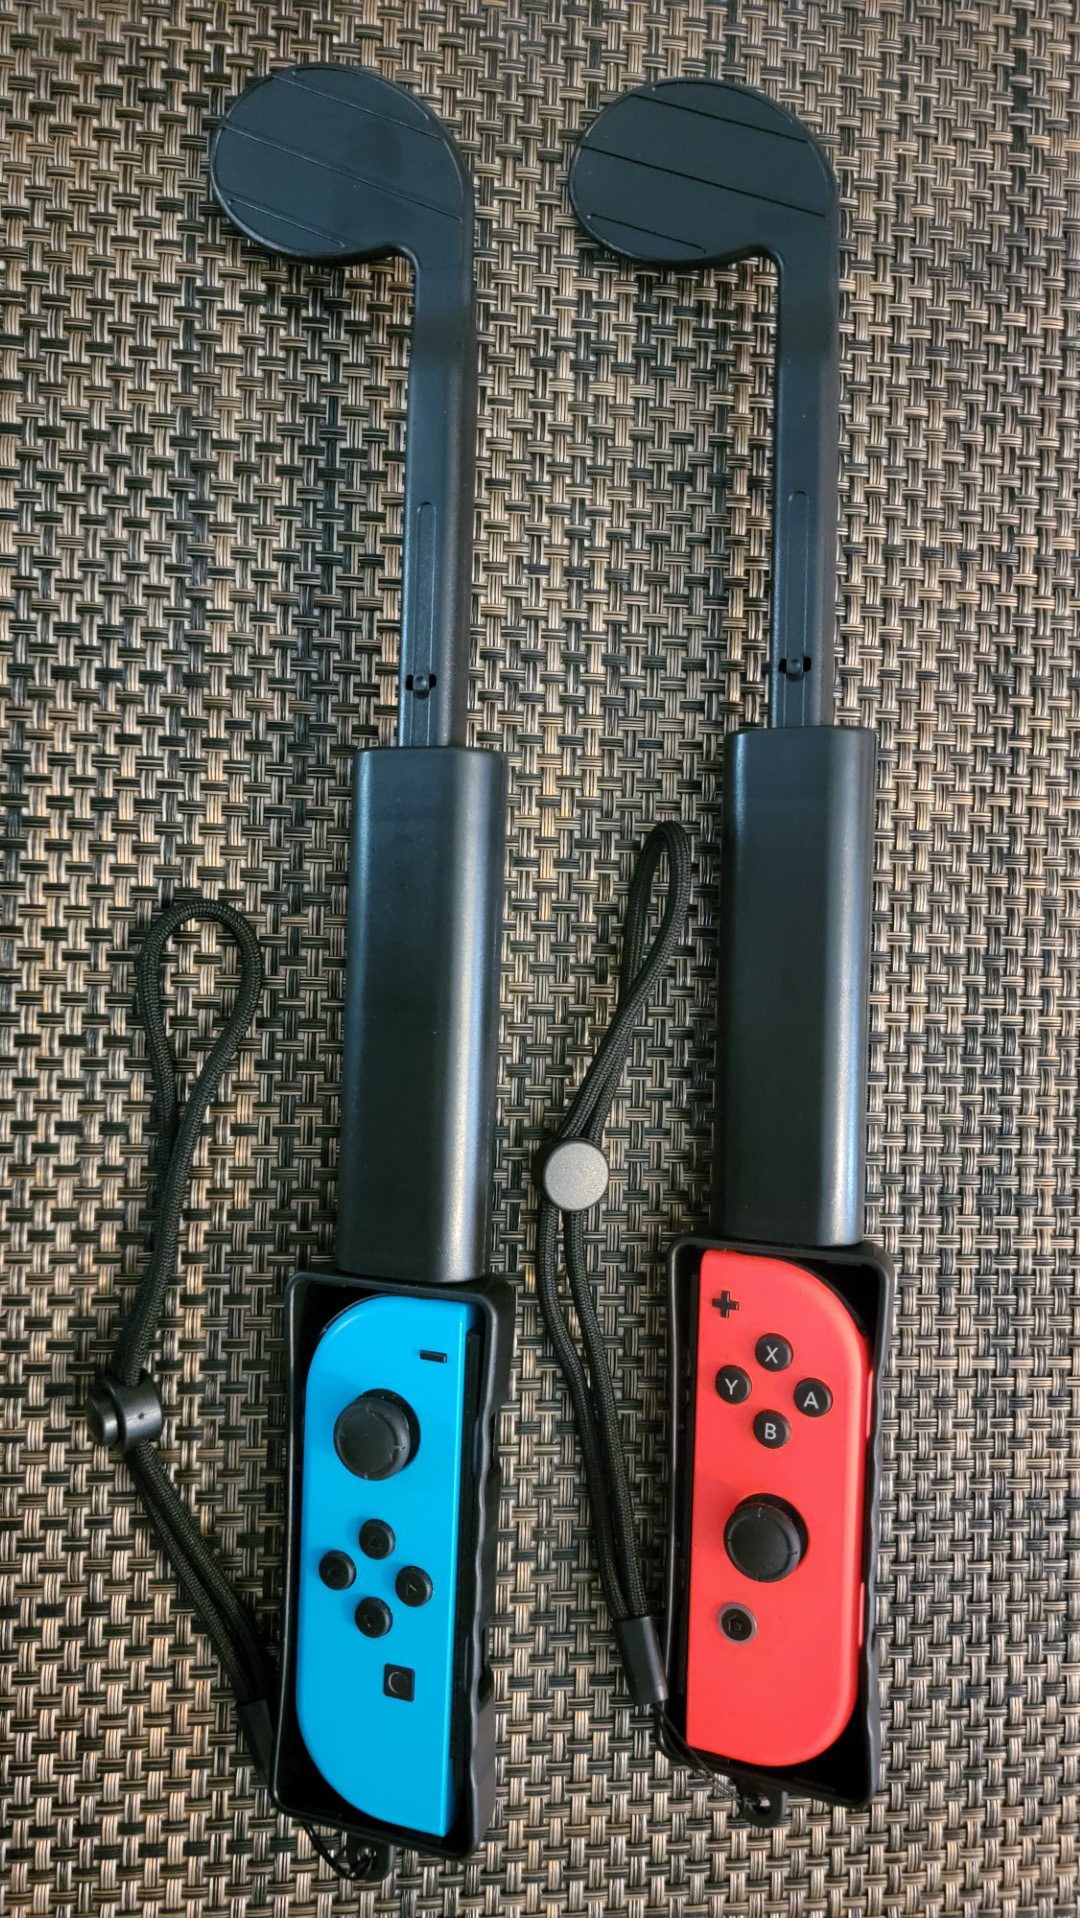 YUANHOT Nintendo Switch Joy-Con Golf Grips with Joy-Cons inserted